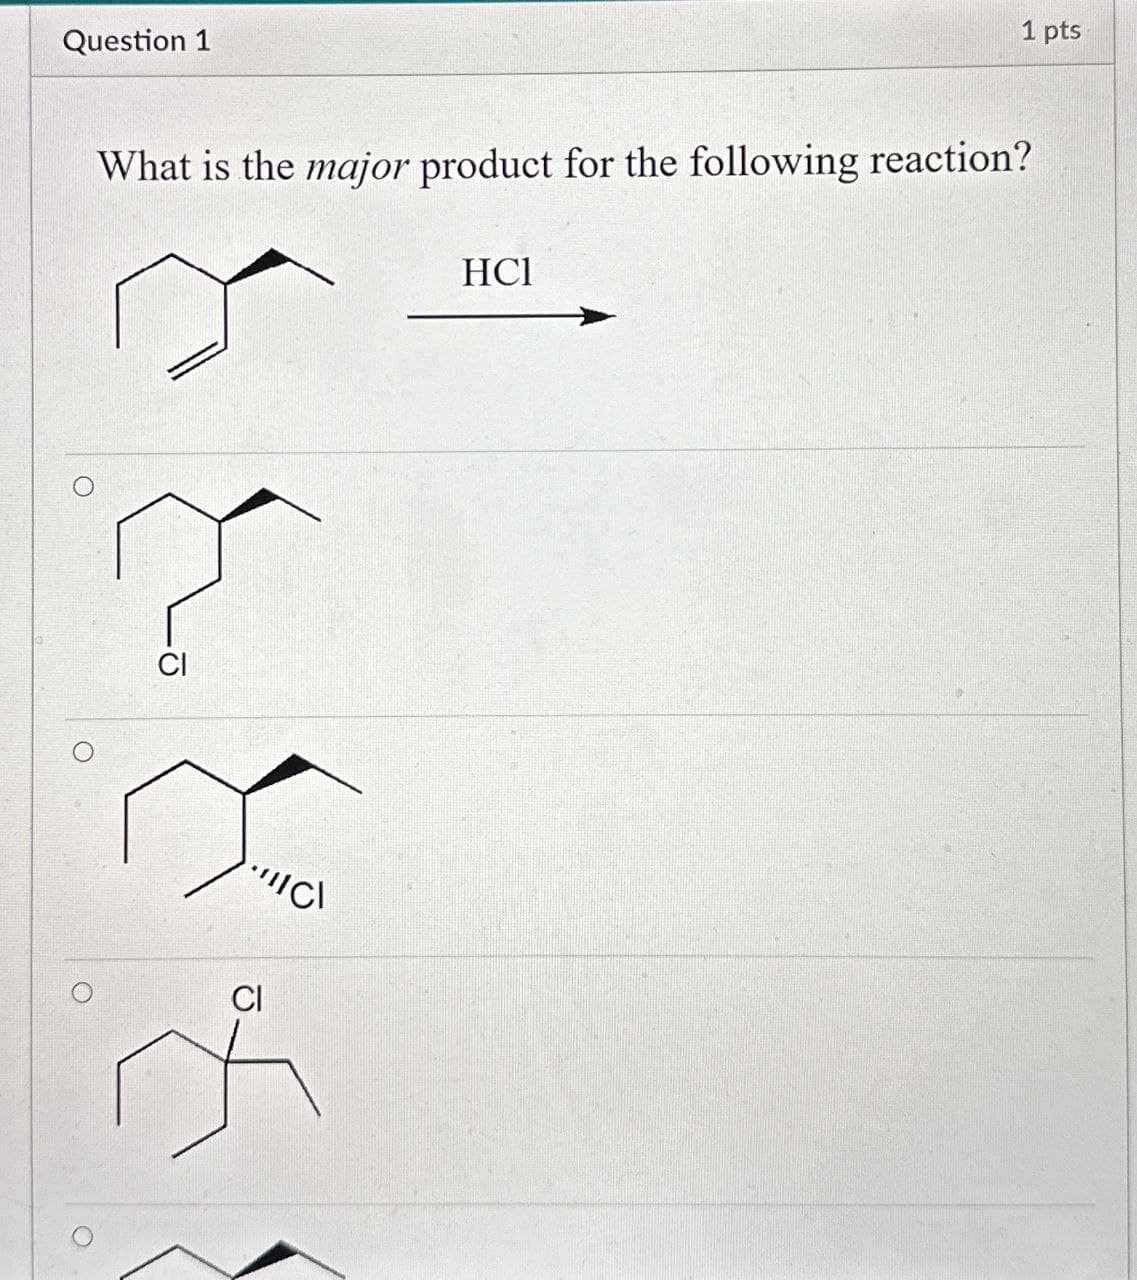 Question 1
1 pts
What is the major product for the following reaction?
"C\
CI
HC1